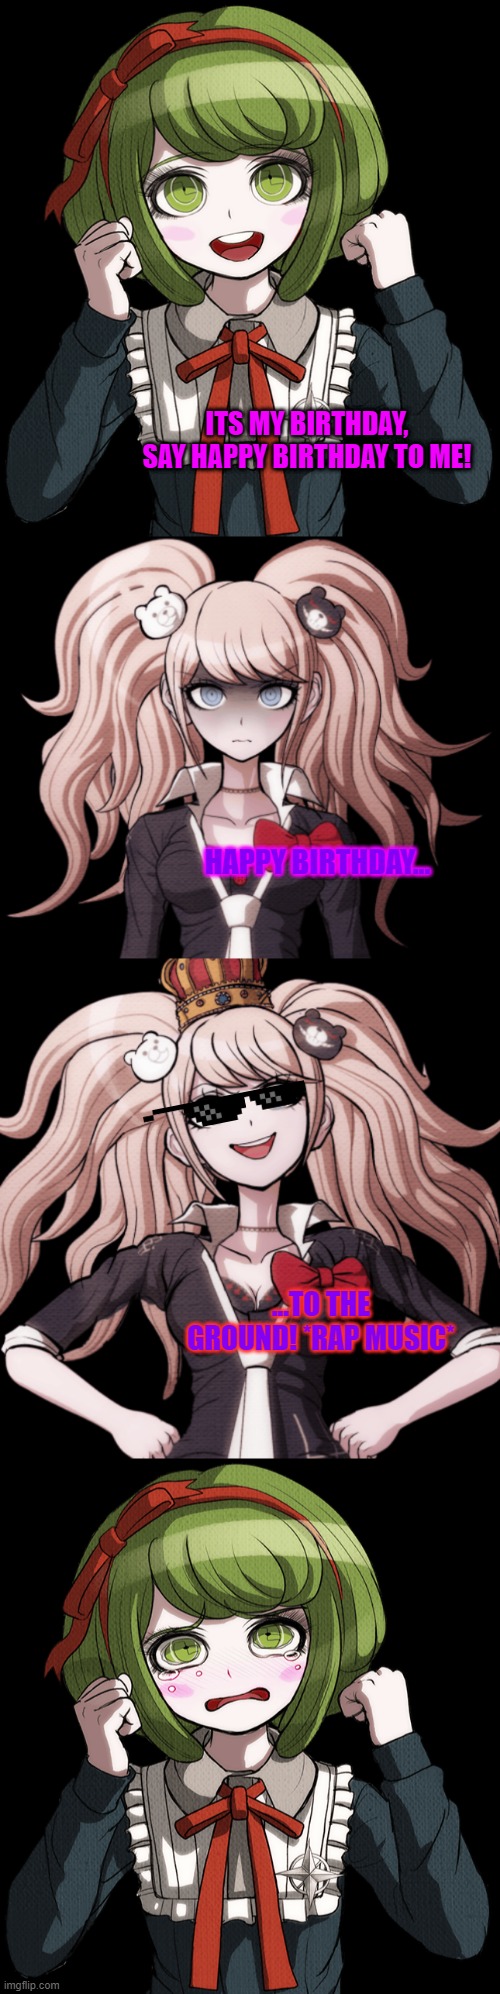 NOBODY CARES! | ITS MY BIRTHDAY, SAY HAPPY BIRTHDAY TO ME! HAPPY BIRTHDAY... ...TO THE GROUND! *RAP MUSIC* | image tagged in danganronpa,funny memes,birthday,lol | made w/ Imgflip meme maker